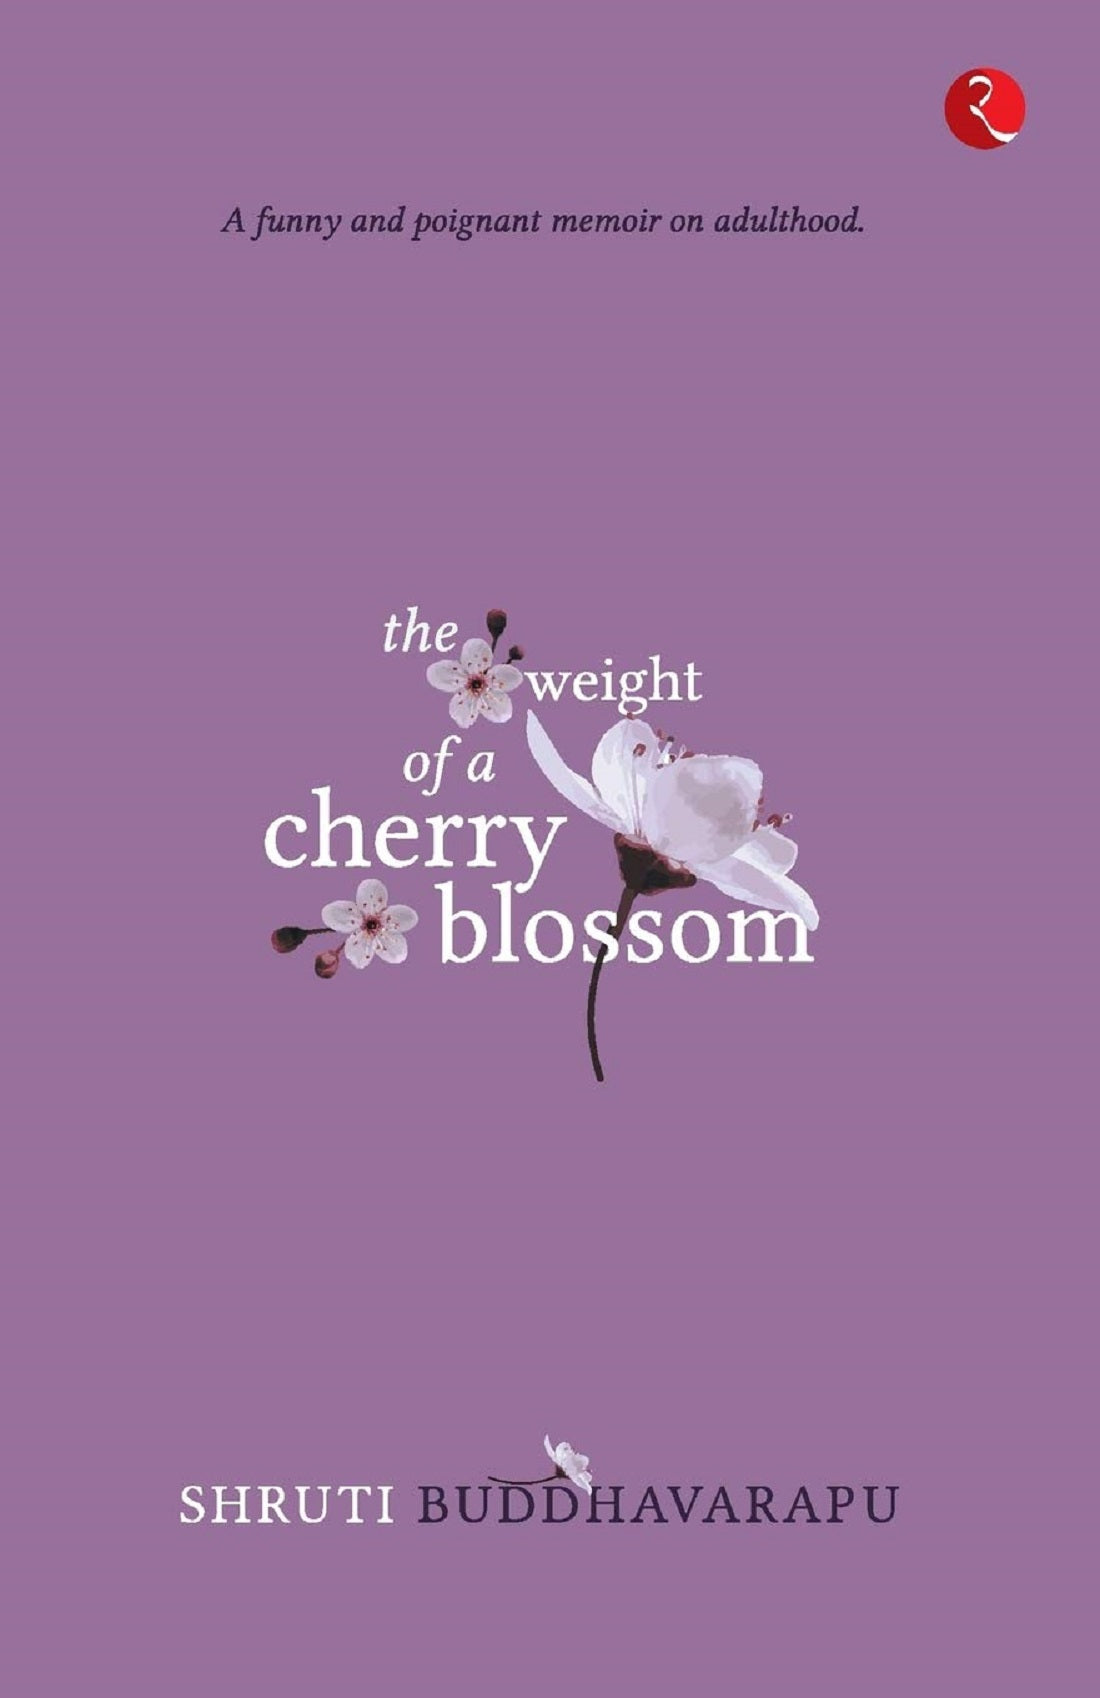 THE WEIGHT OF A CHERRY BLOSSOM